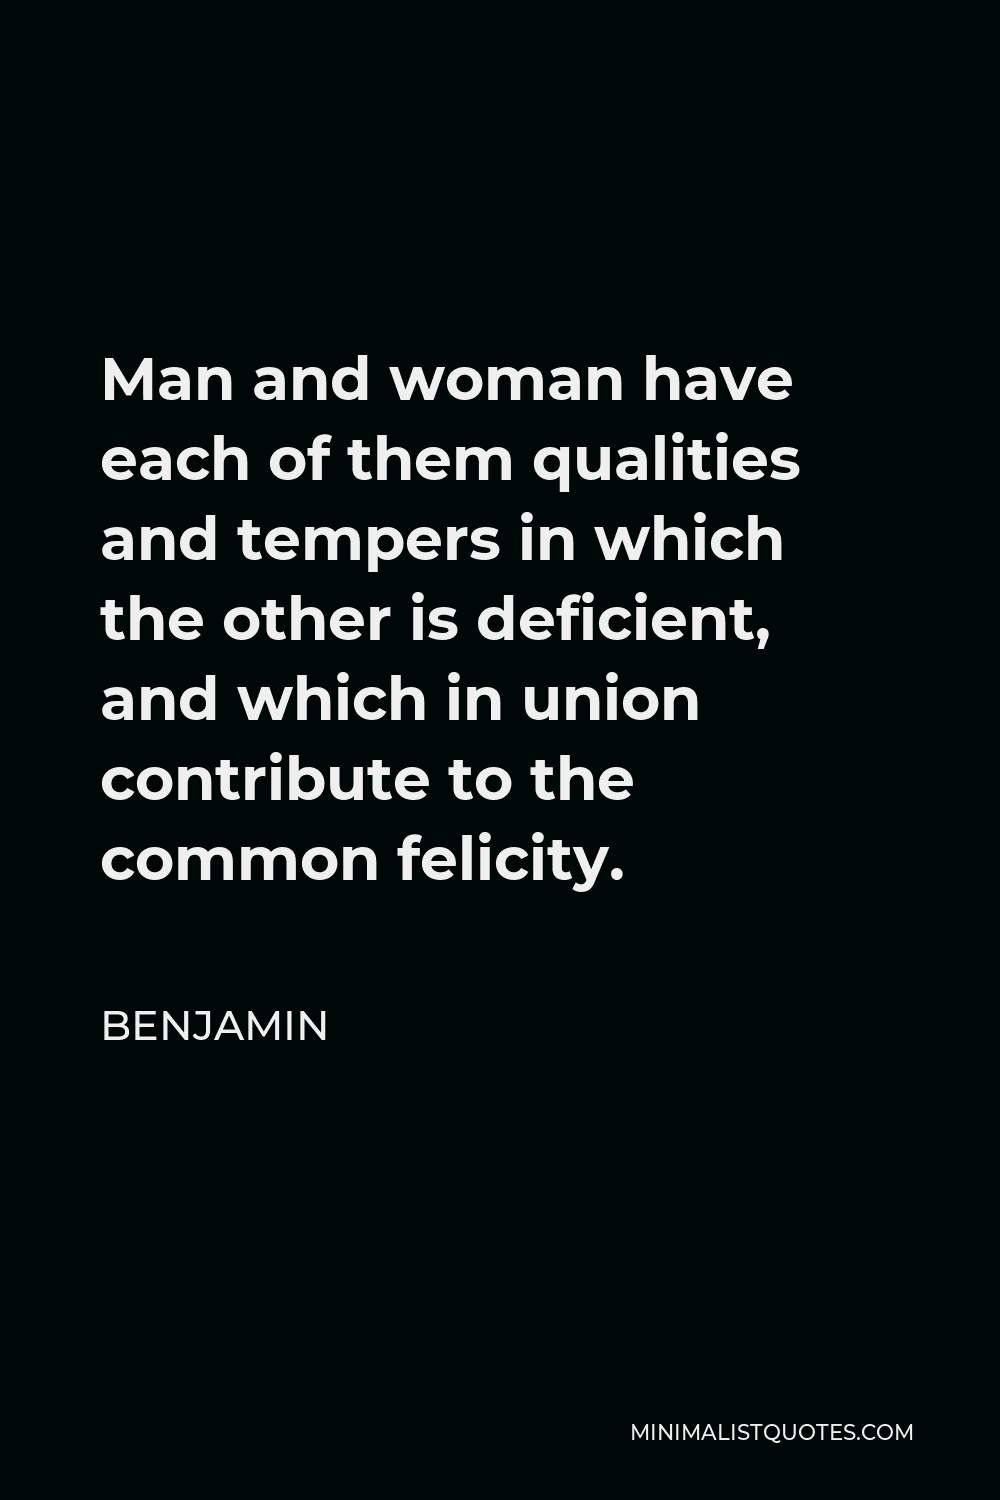 Benjamin Quote - Man and woman have each of them qualities and tempers in which the other is deficient, and which in union contribute to the common felicity.